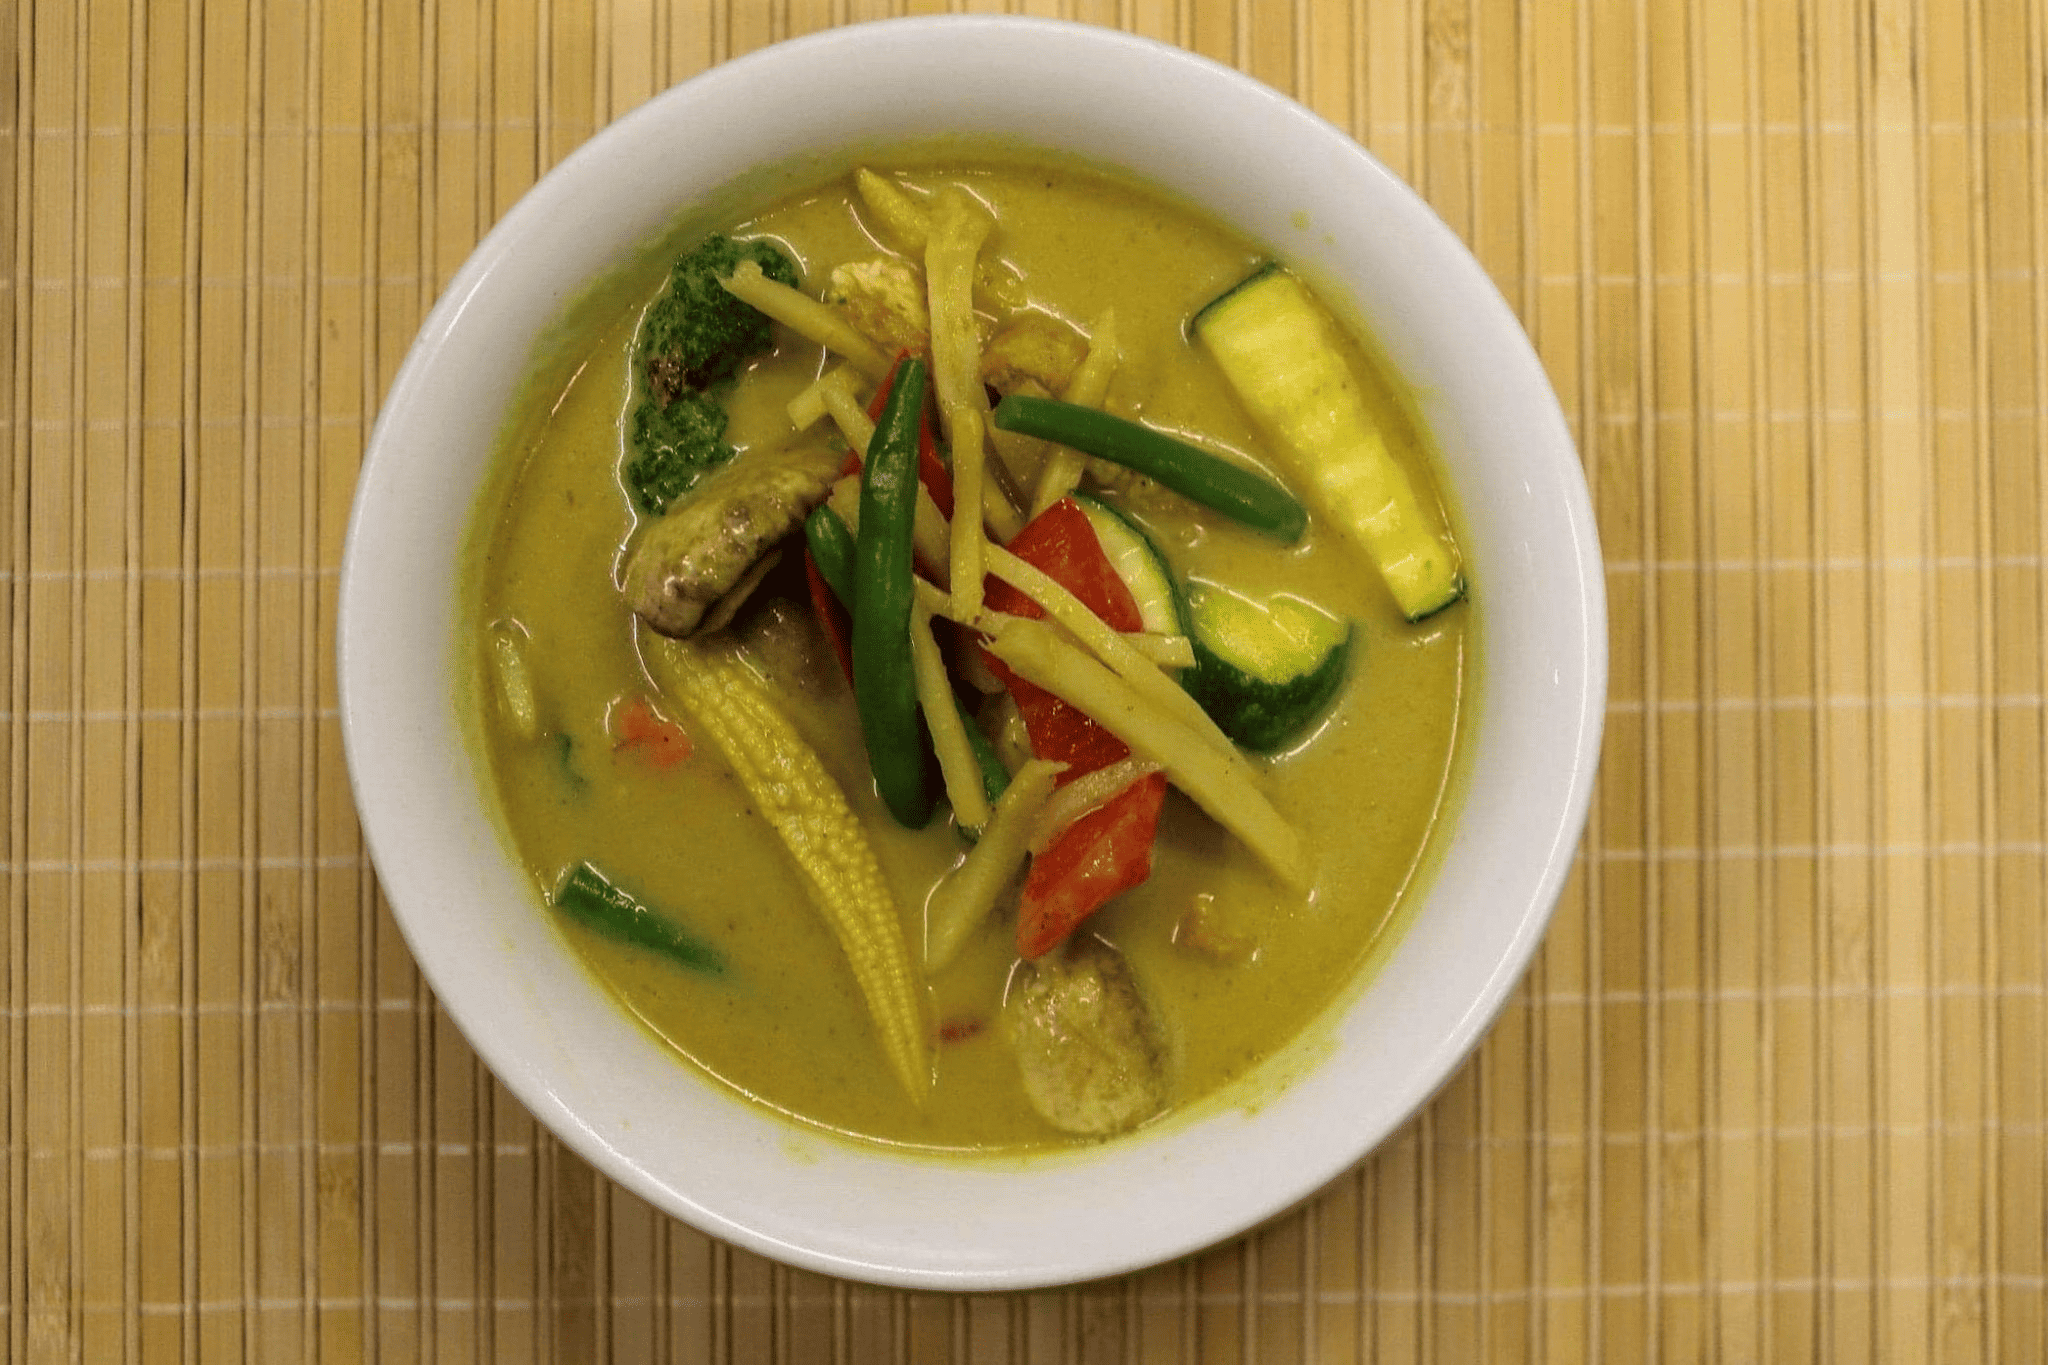 A bowl of Green Curry Chicken with tender meat, vegetables, and aromatic green sauce, garnished with basil.